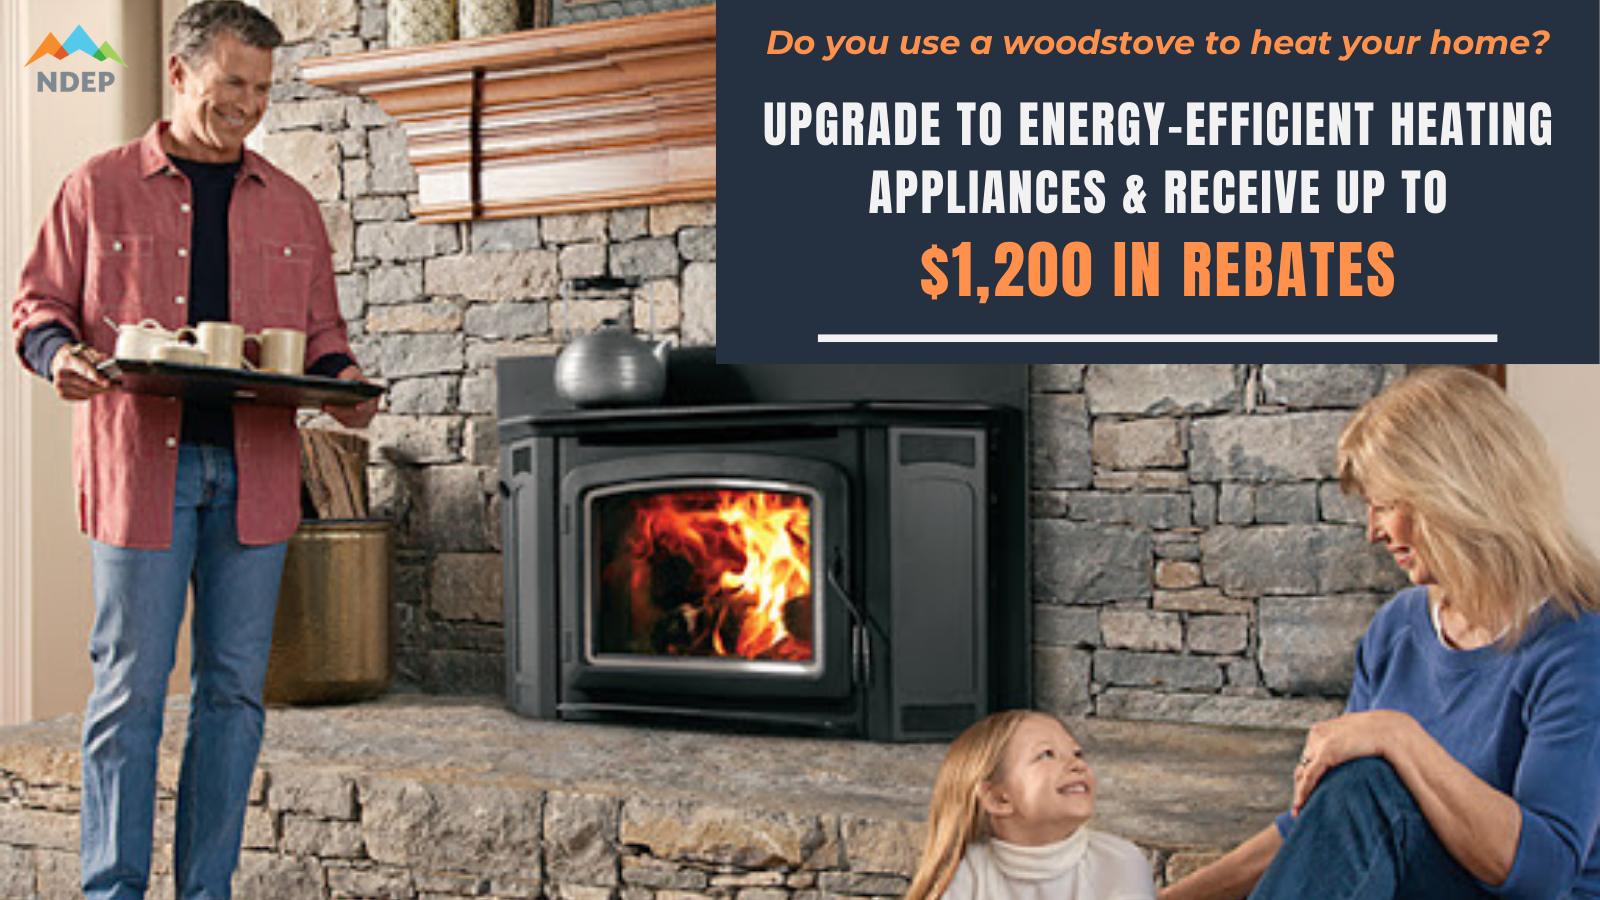 new-ladwp-program-offers-225-rebate-on-energy-efficient-ac-units-for